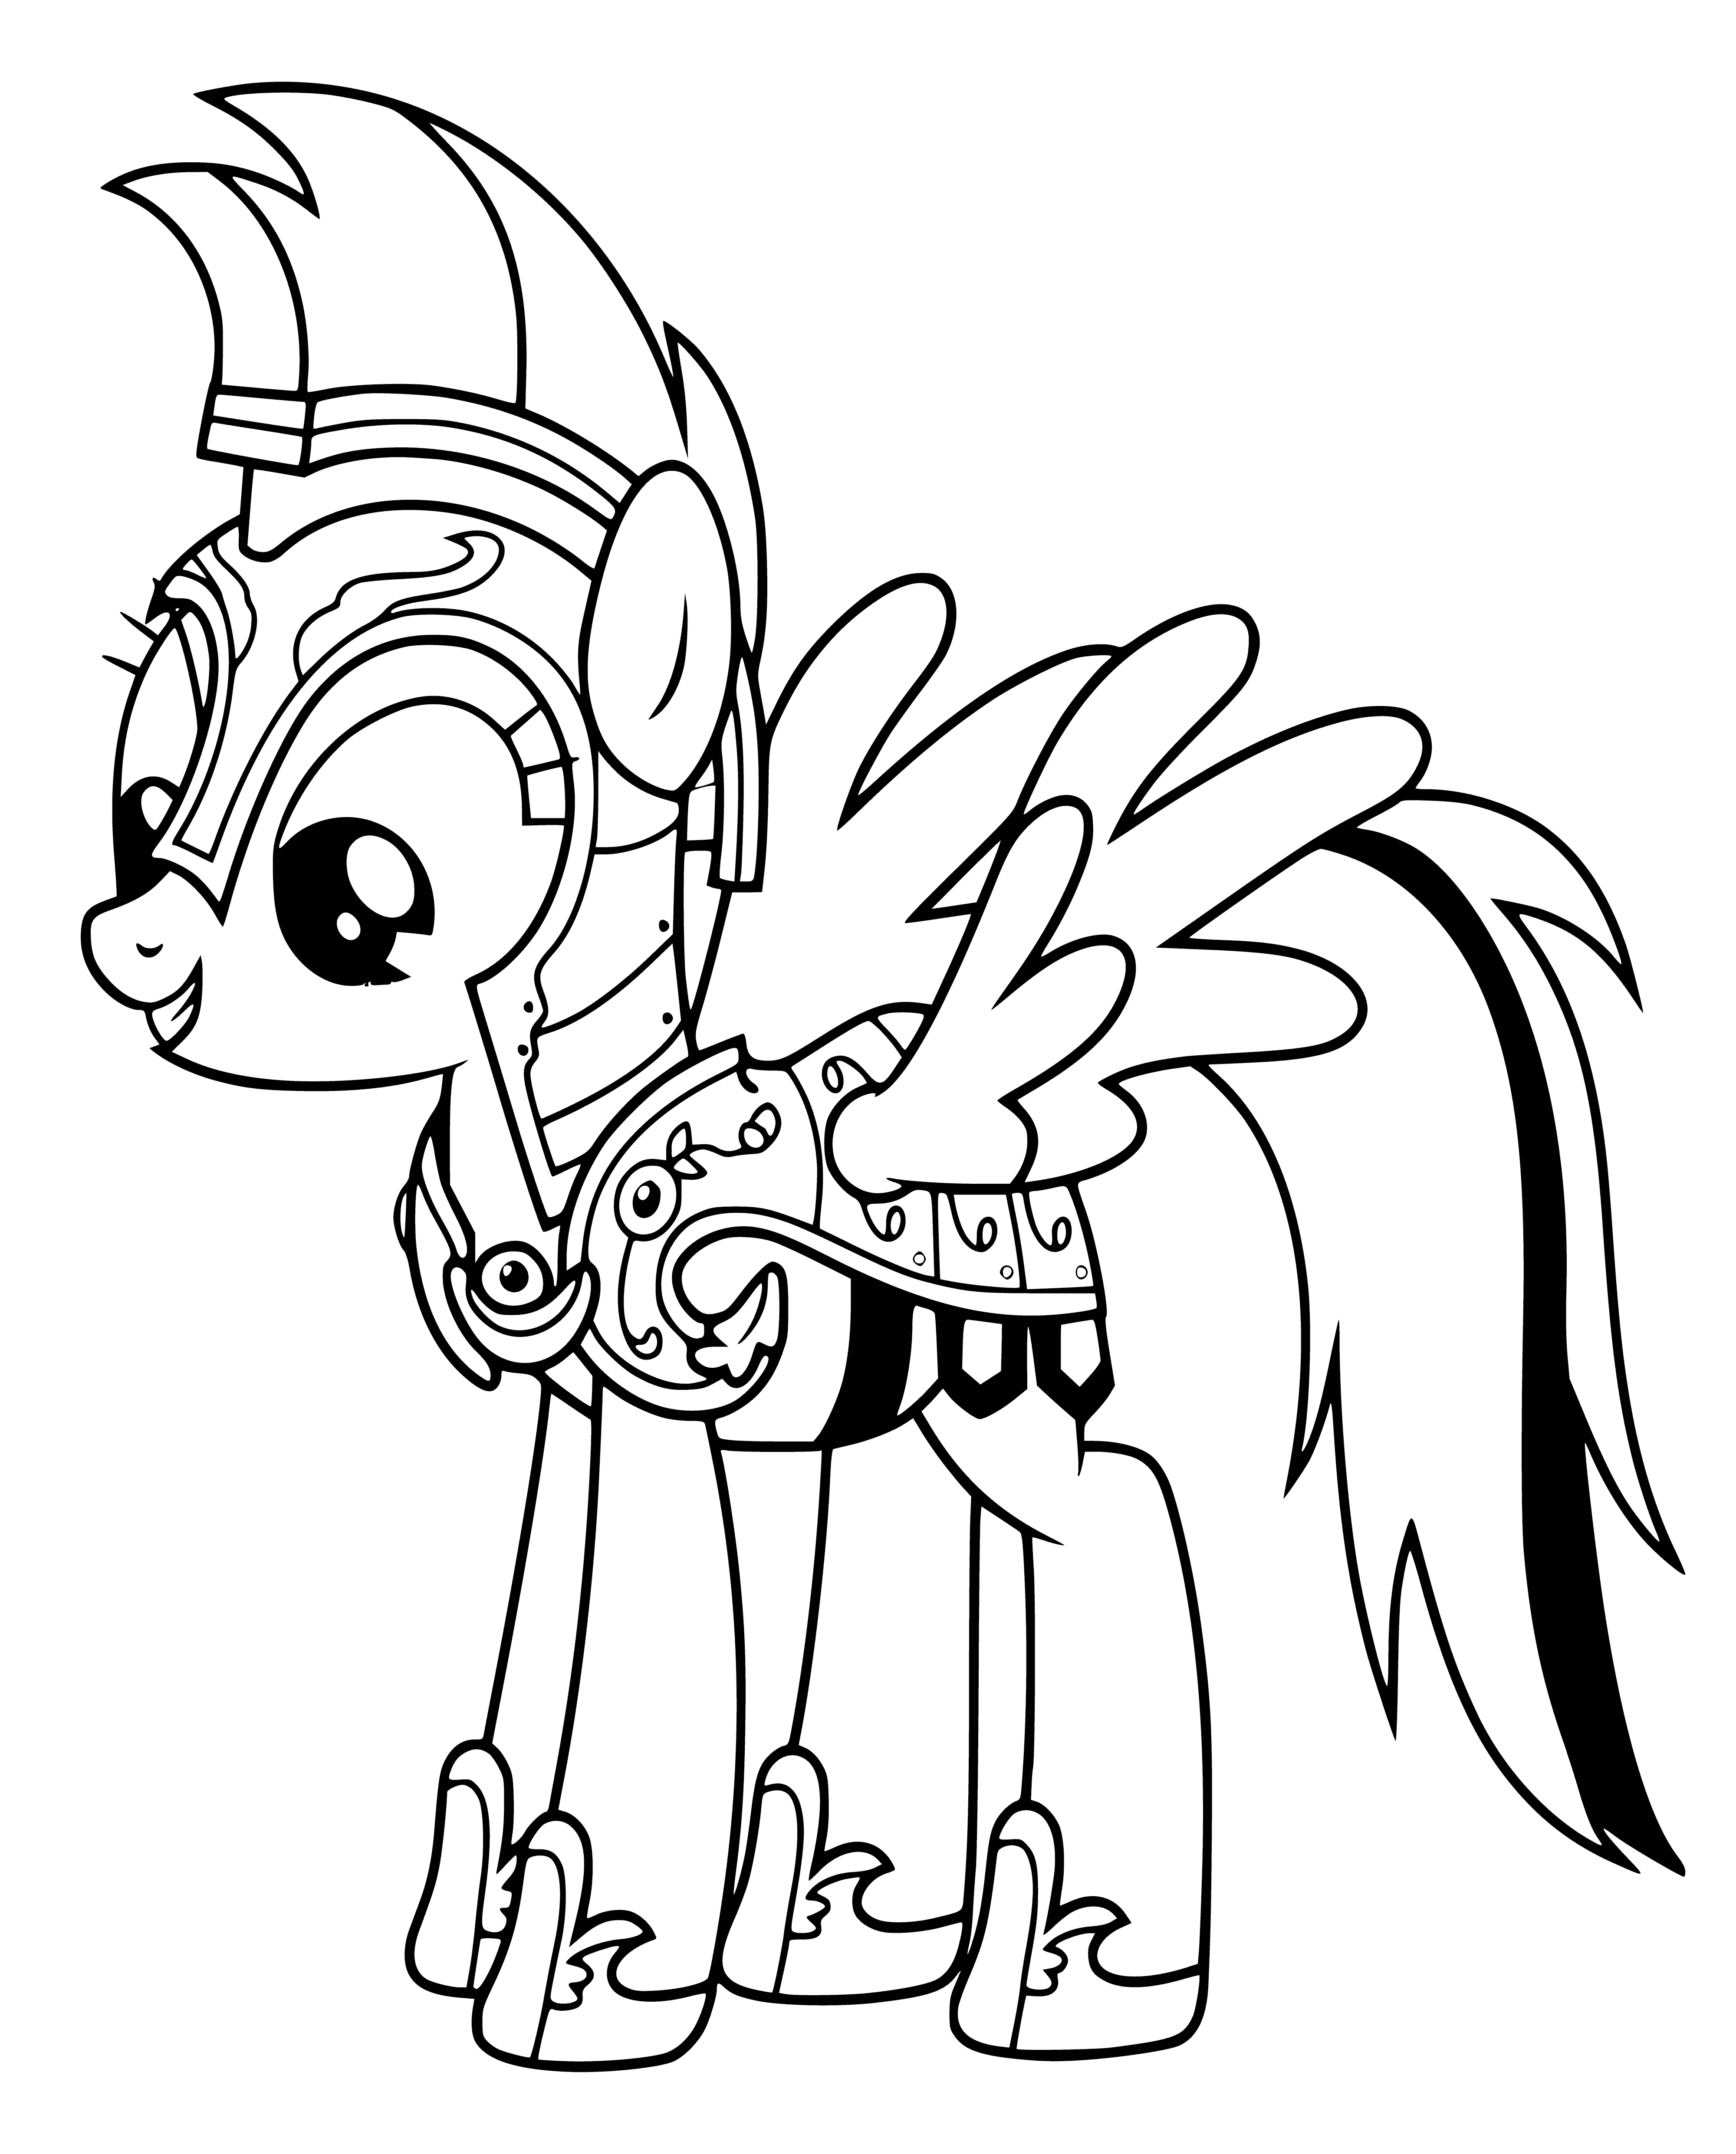 coloring page: A blue pony with rainbow hair and tail stands on its hind legs, adorned with a pink bow on its left ear. #PonyLove